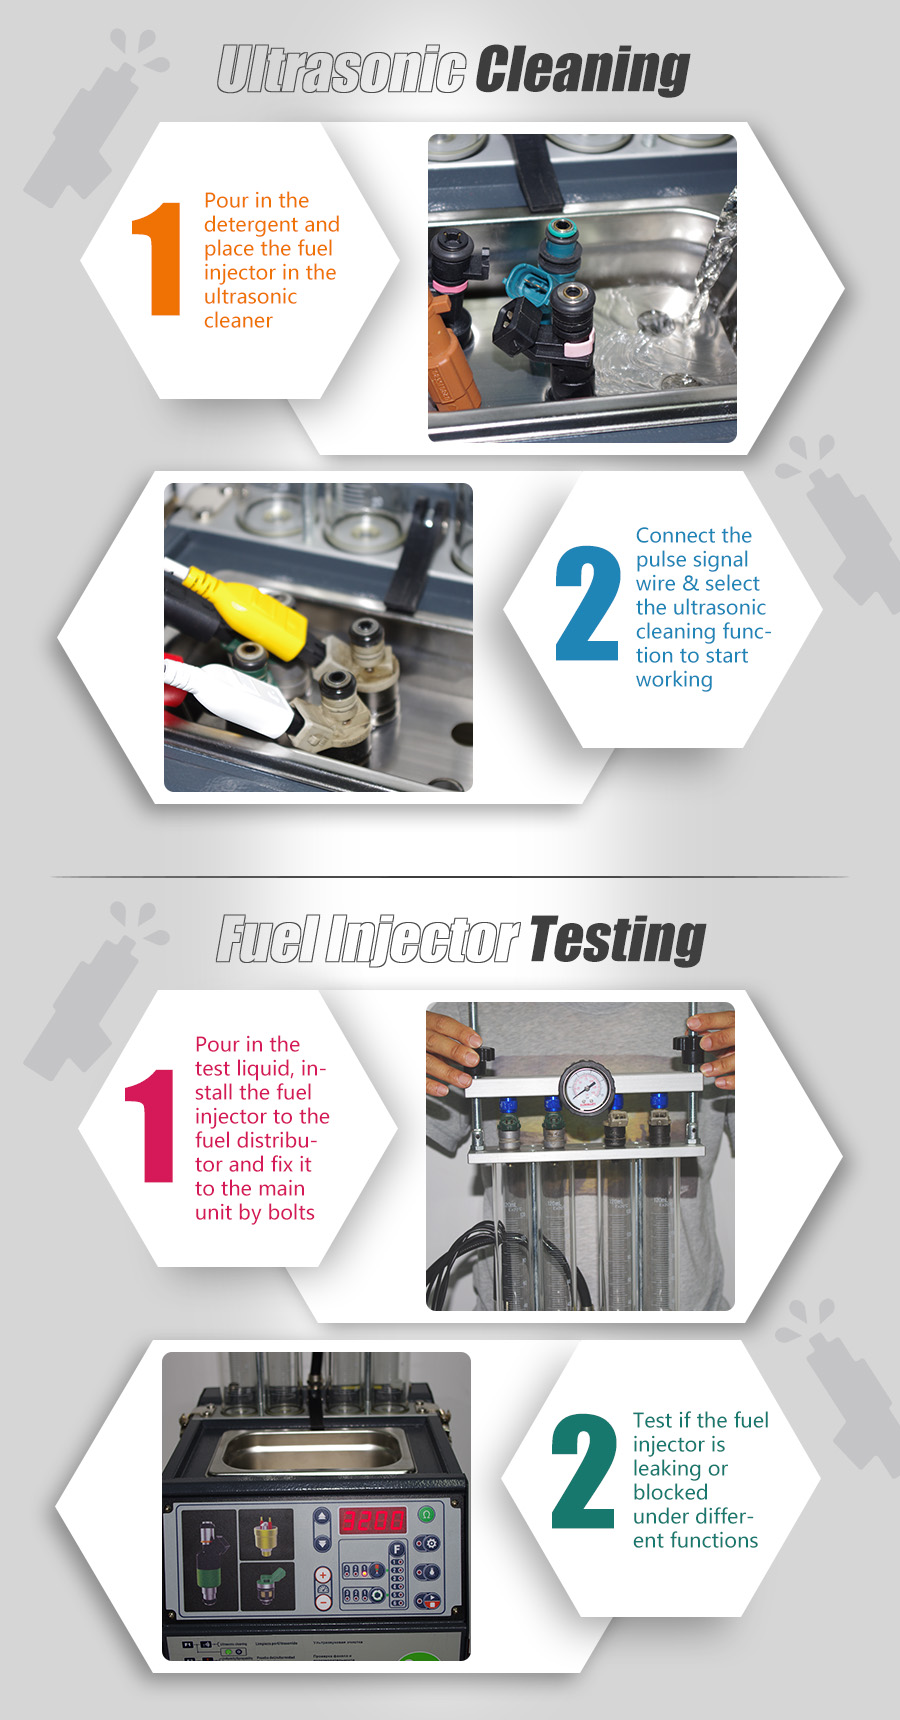 How to use SUMMARY POWERJET PRO 240 Injector Cleaner & Tester